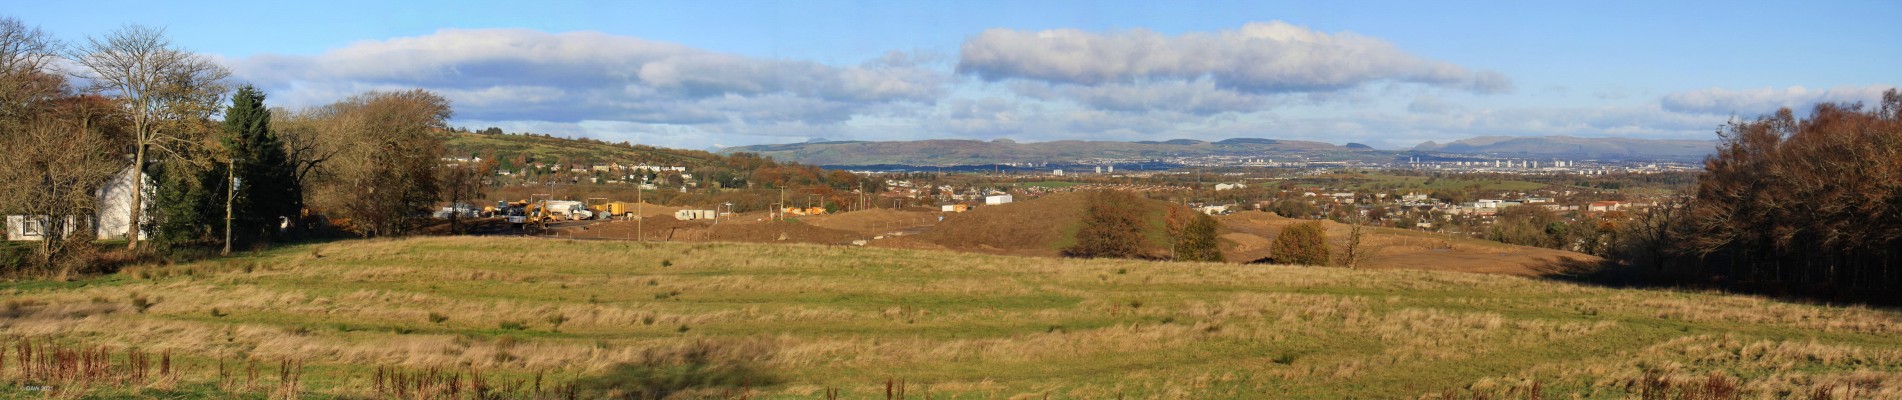 Springfield road panorama, Barrhead
Taken in 2017 before the new house construction started.  This is part of the major expansion of Barrhead that has been in the planning for many years.  It is moving the boundary out in to what was the green field Springhill area.  The fields here were where I remember the Springhill Primary School sports day being held in 1960 something! [url=http://streetmap.co.uk/map?X=250052&Y=657505&A=Y&Z=115/] Map location. [/url]
